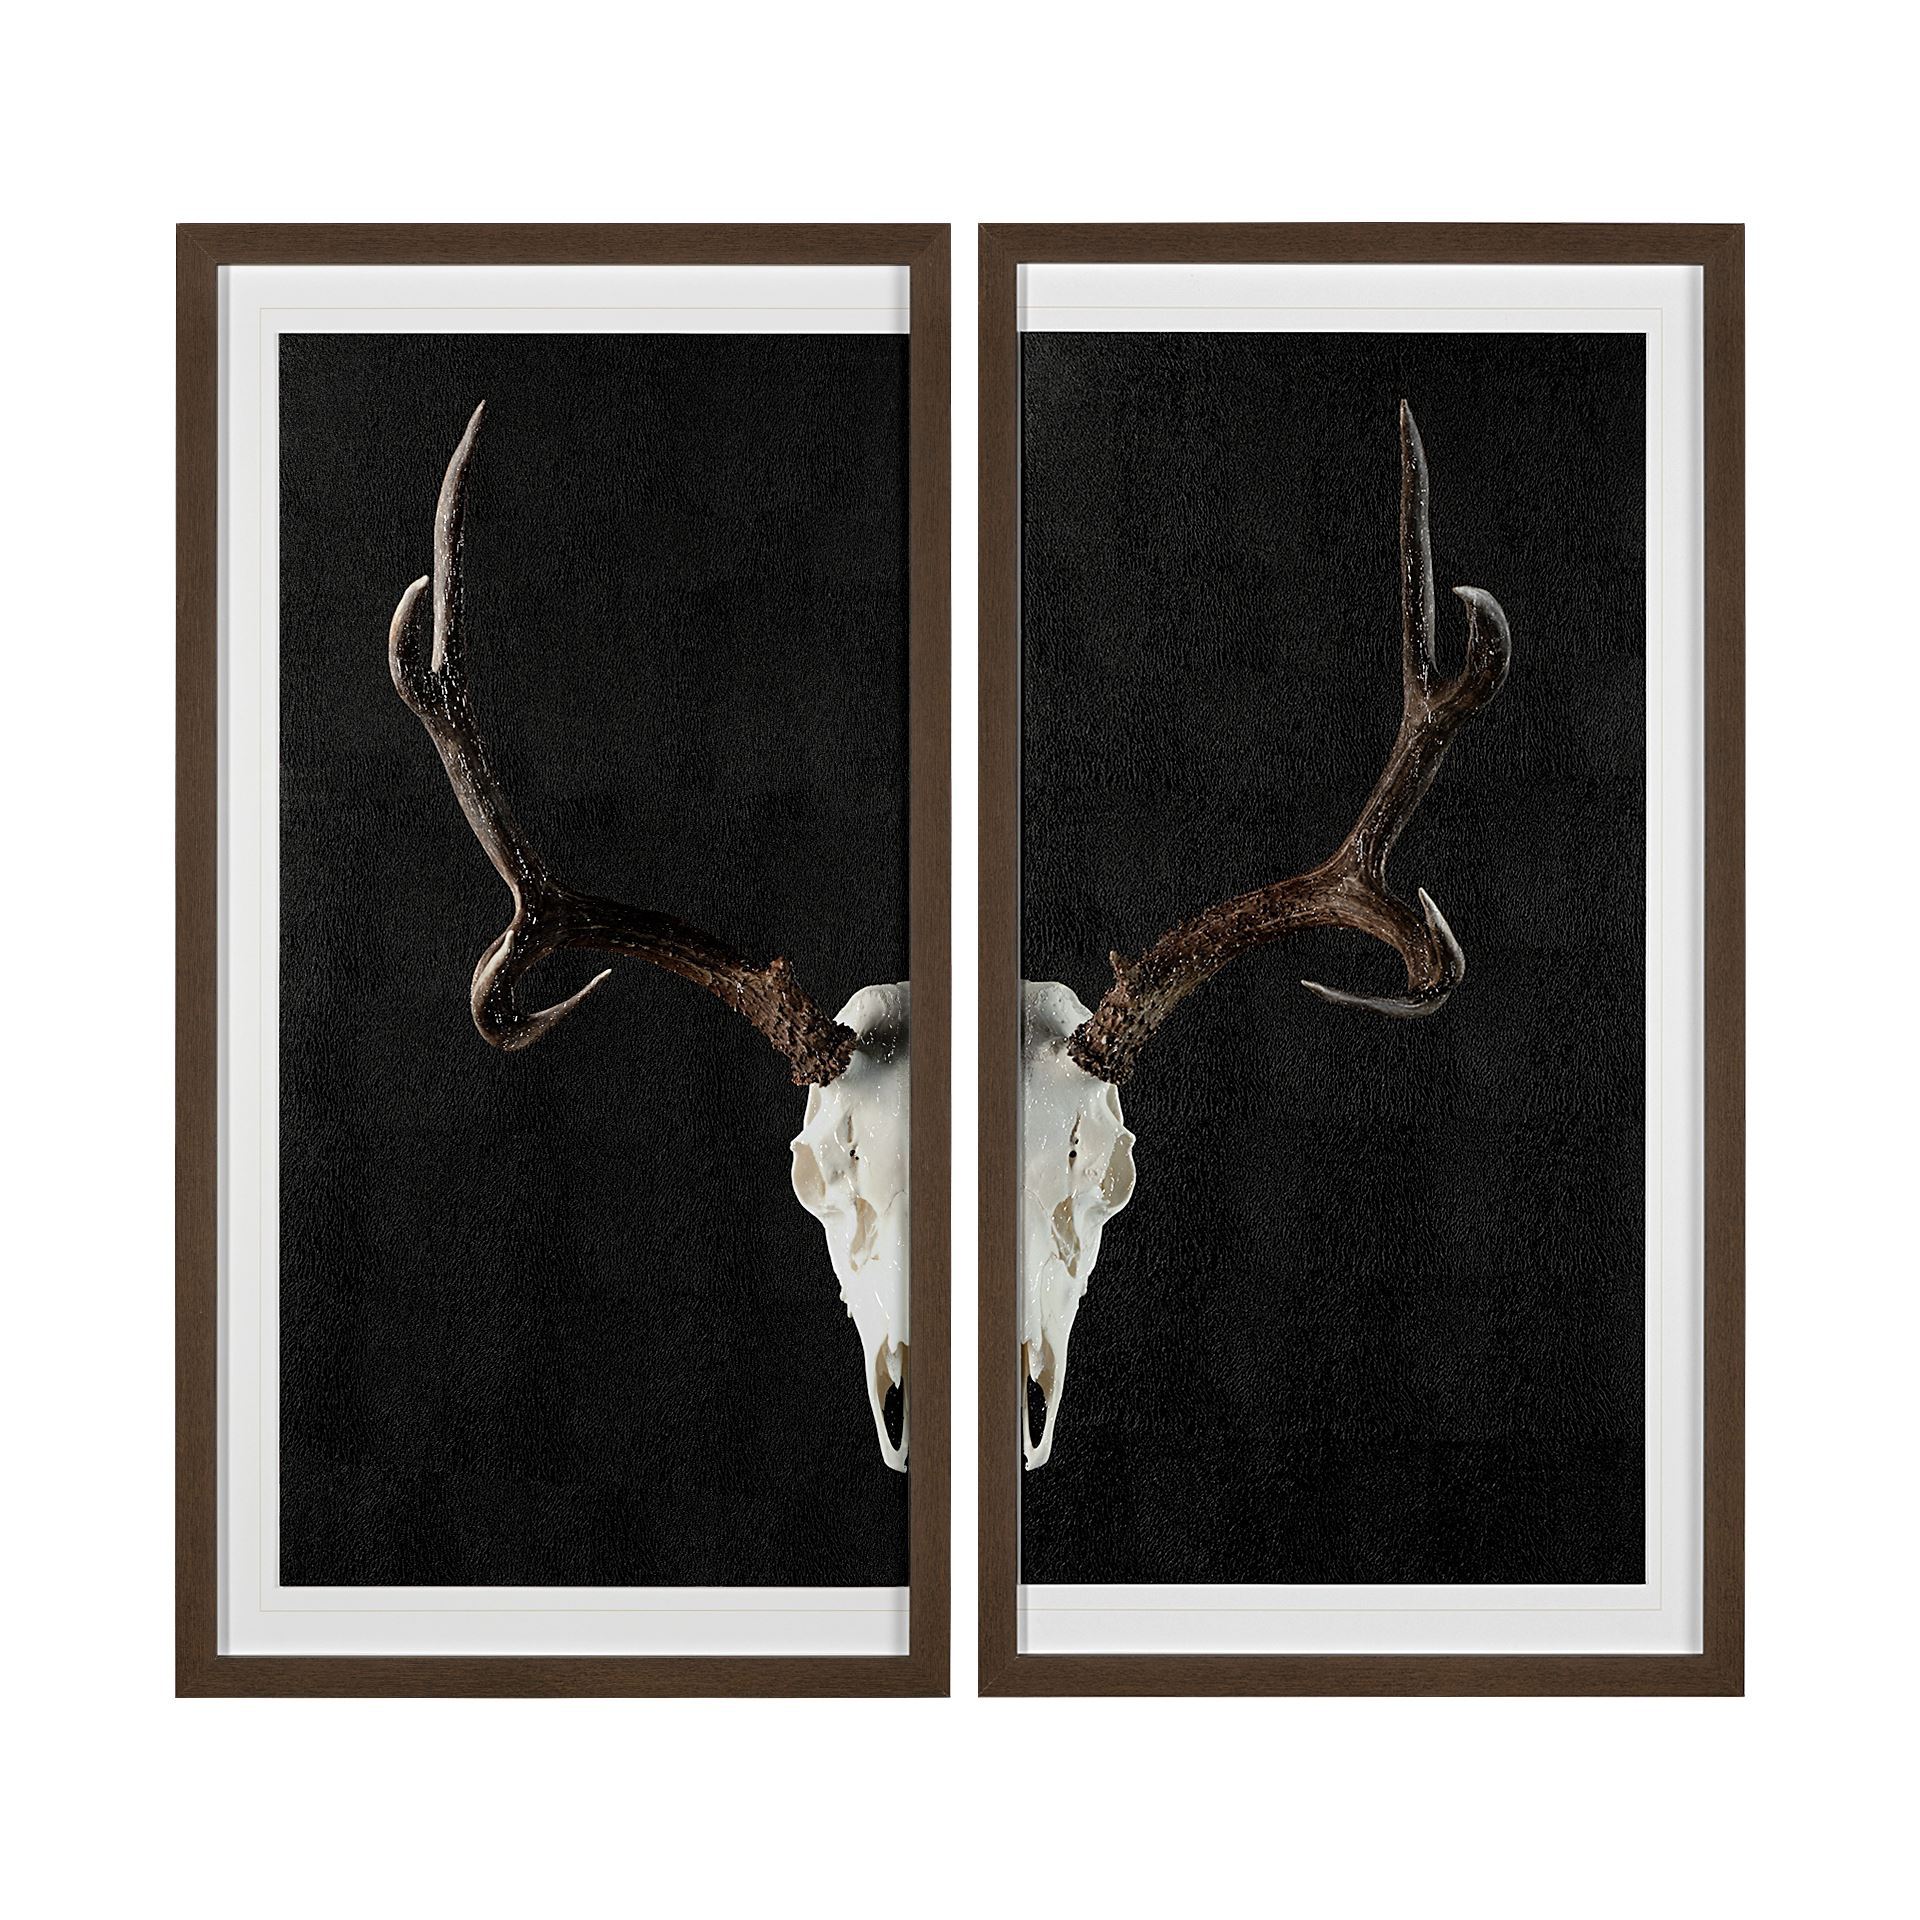 Rustic Stag Horn Art | City Home